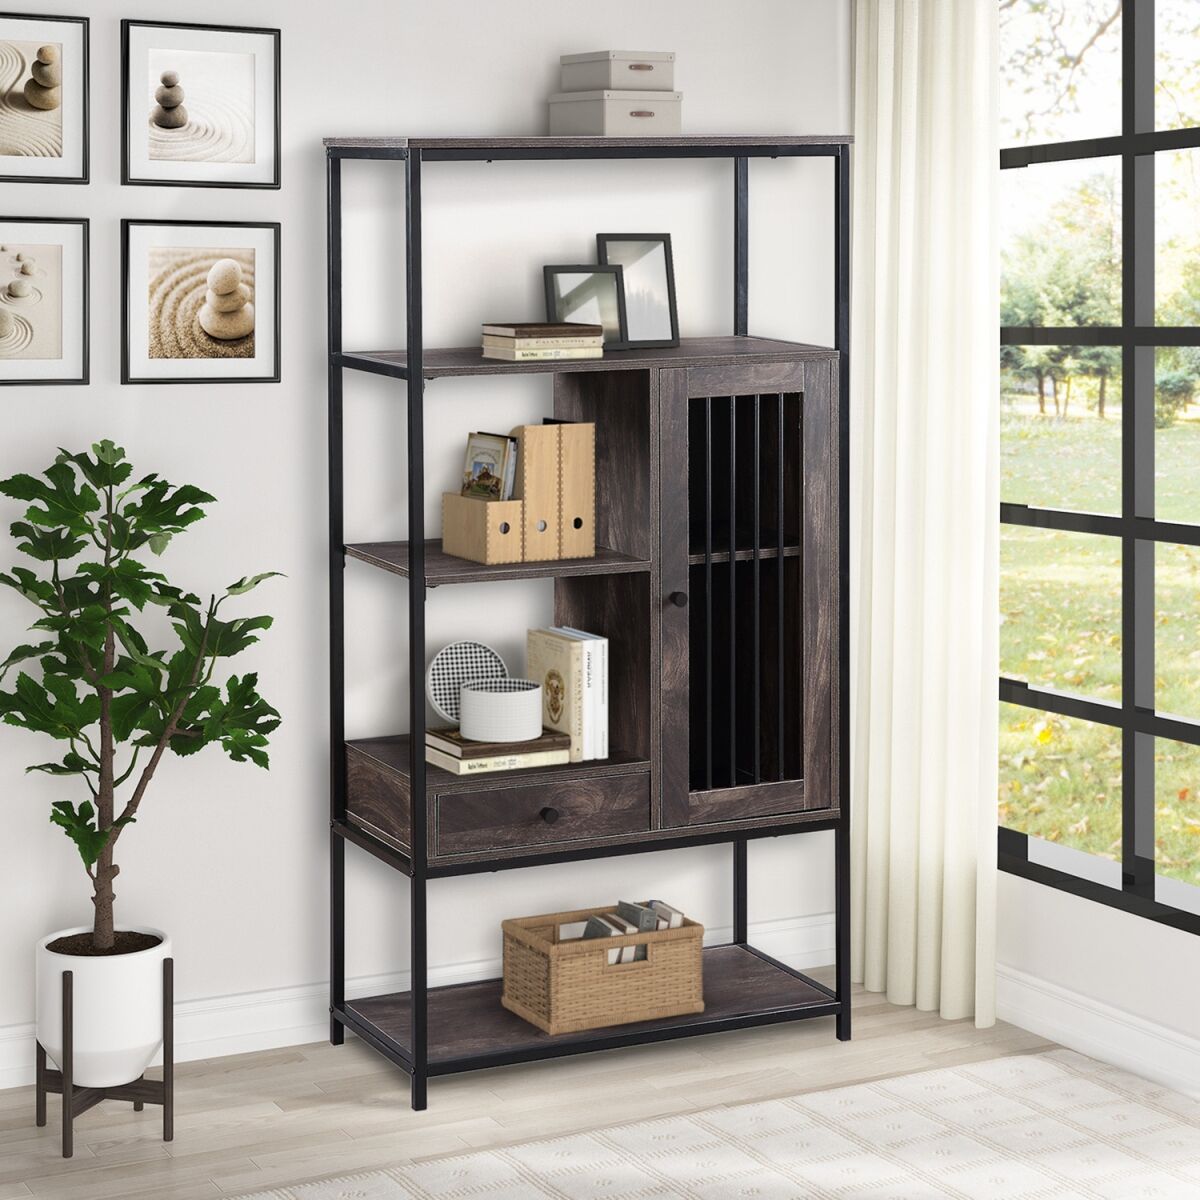 Simplie Fun Home Office Bookcase and Bookshelf 5 Tier Display Shelf with Doors and Drawers, Freestanding Multi-functional Decorative Storage Shelving,